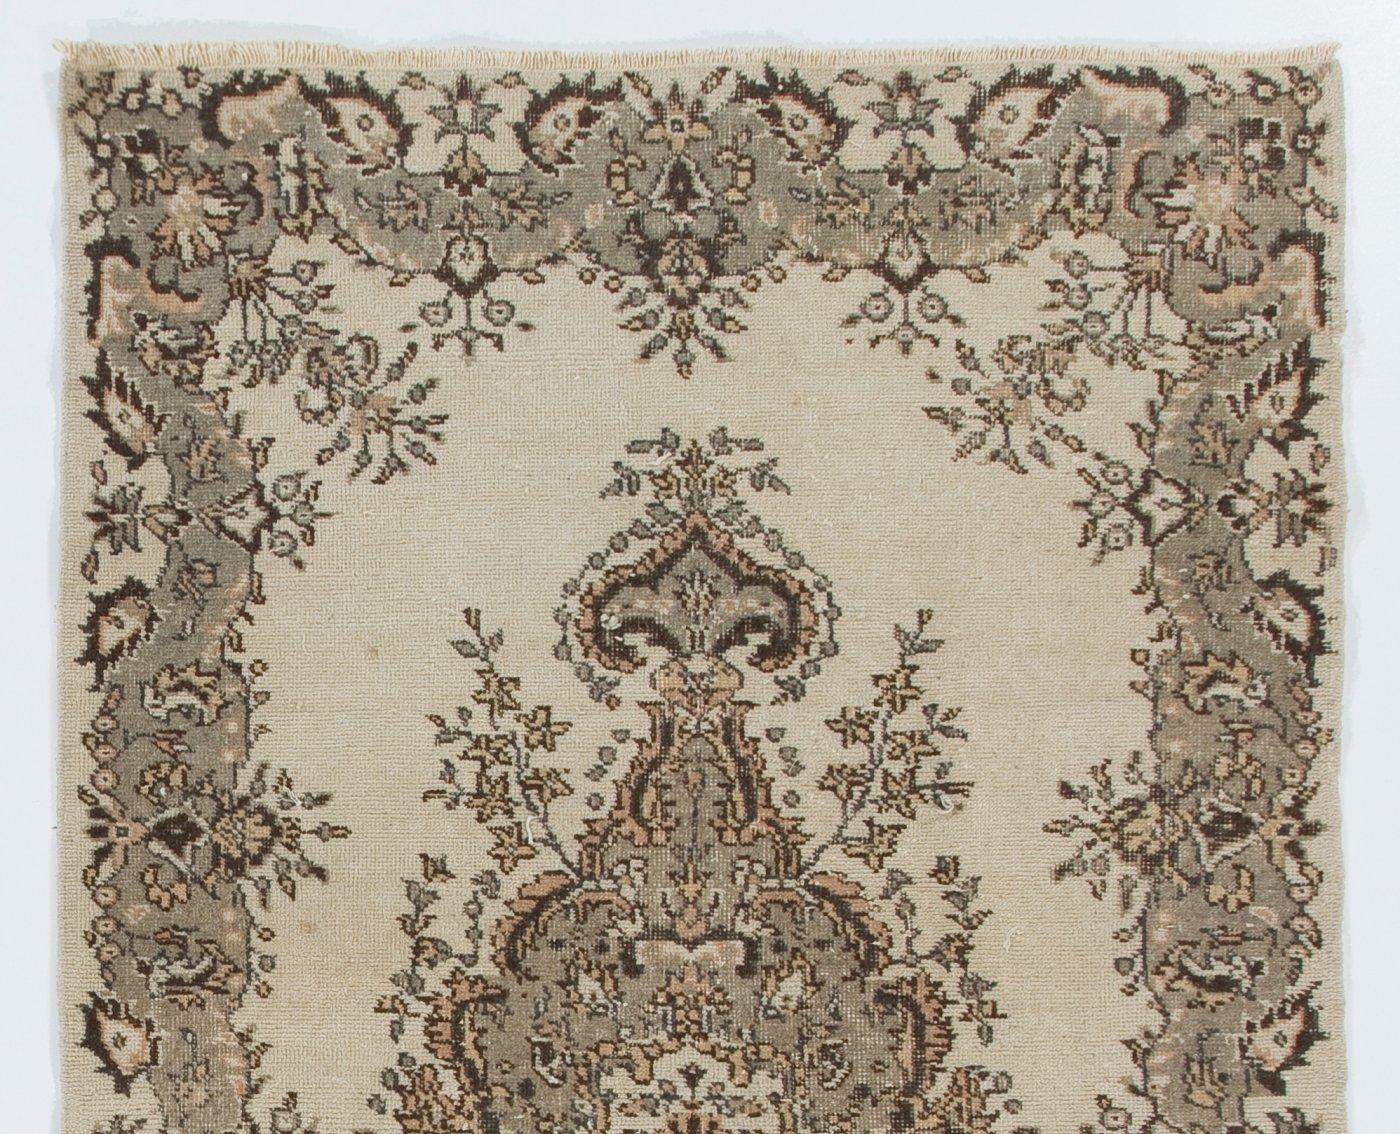 This handmade vintage Central Turkish rug features a floral medallion framed by flowing, floral borders in gray, cream and touches of peach. It was hand-knotted in the 1960s with low wool pile on cotton foundation. The rug is in very good condition,